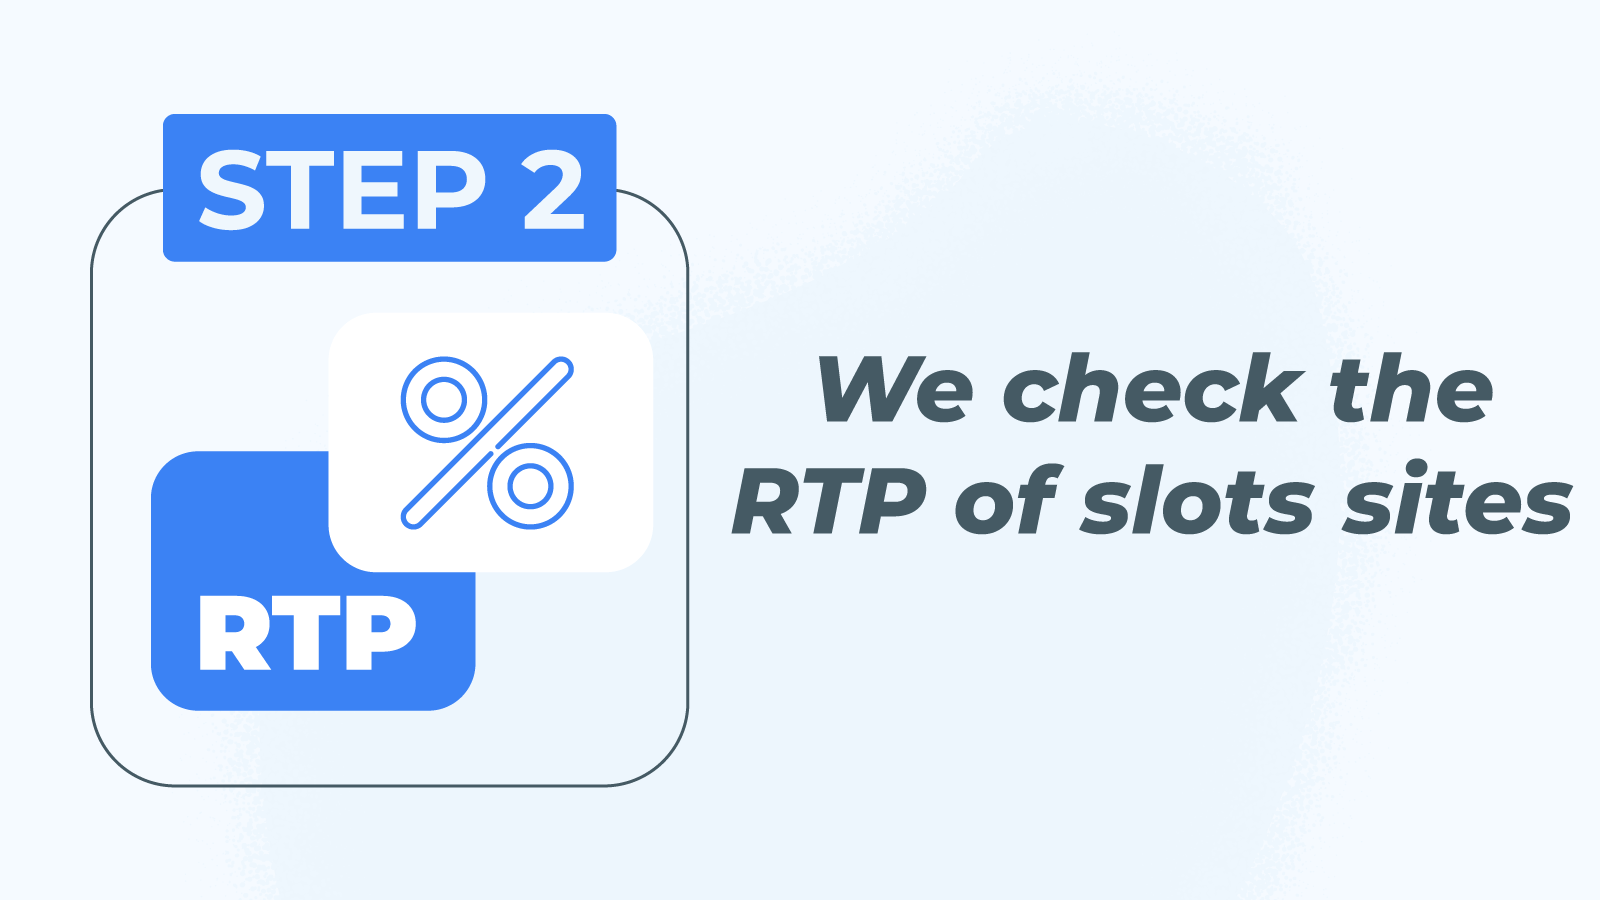 We check the online slots sites’ RTP ourselves